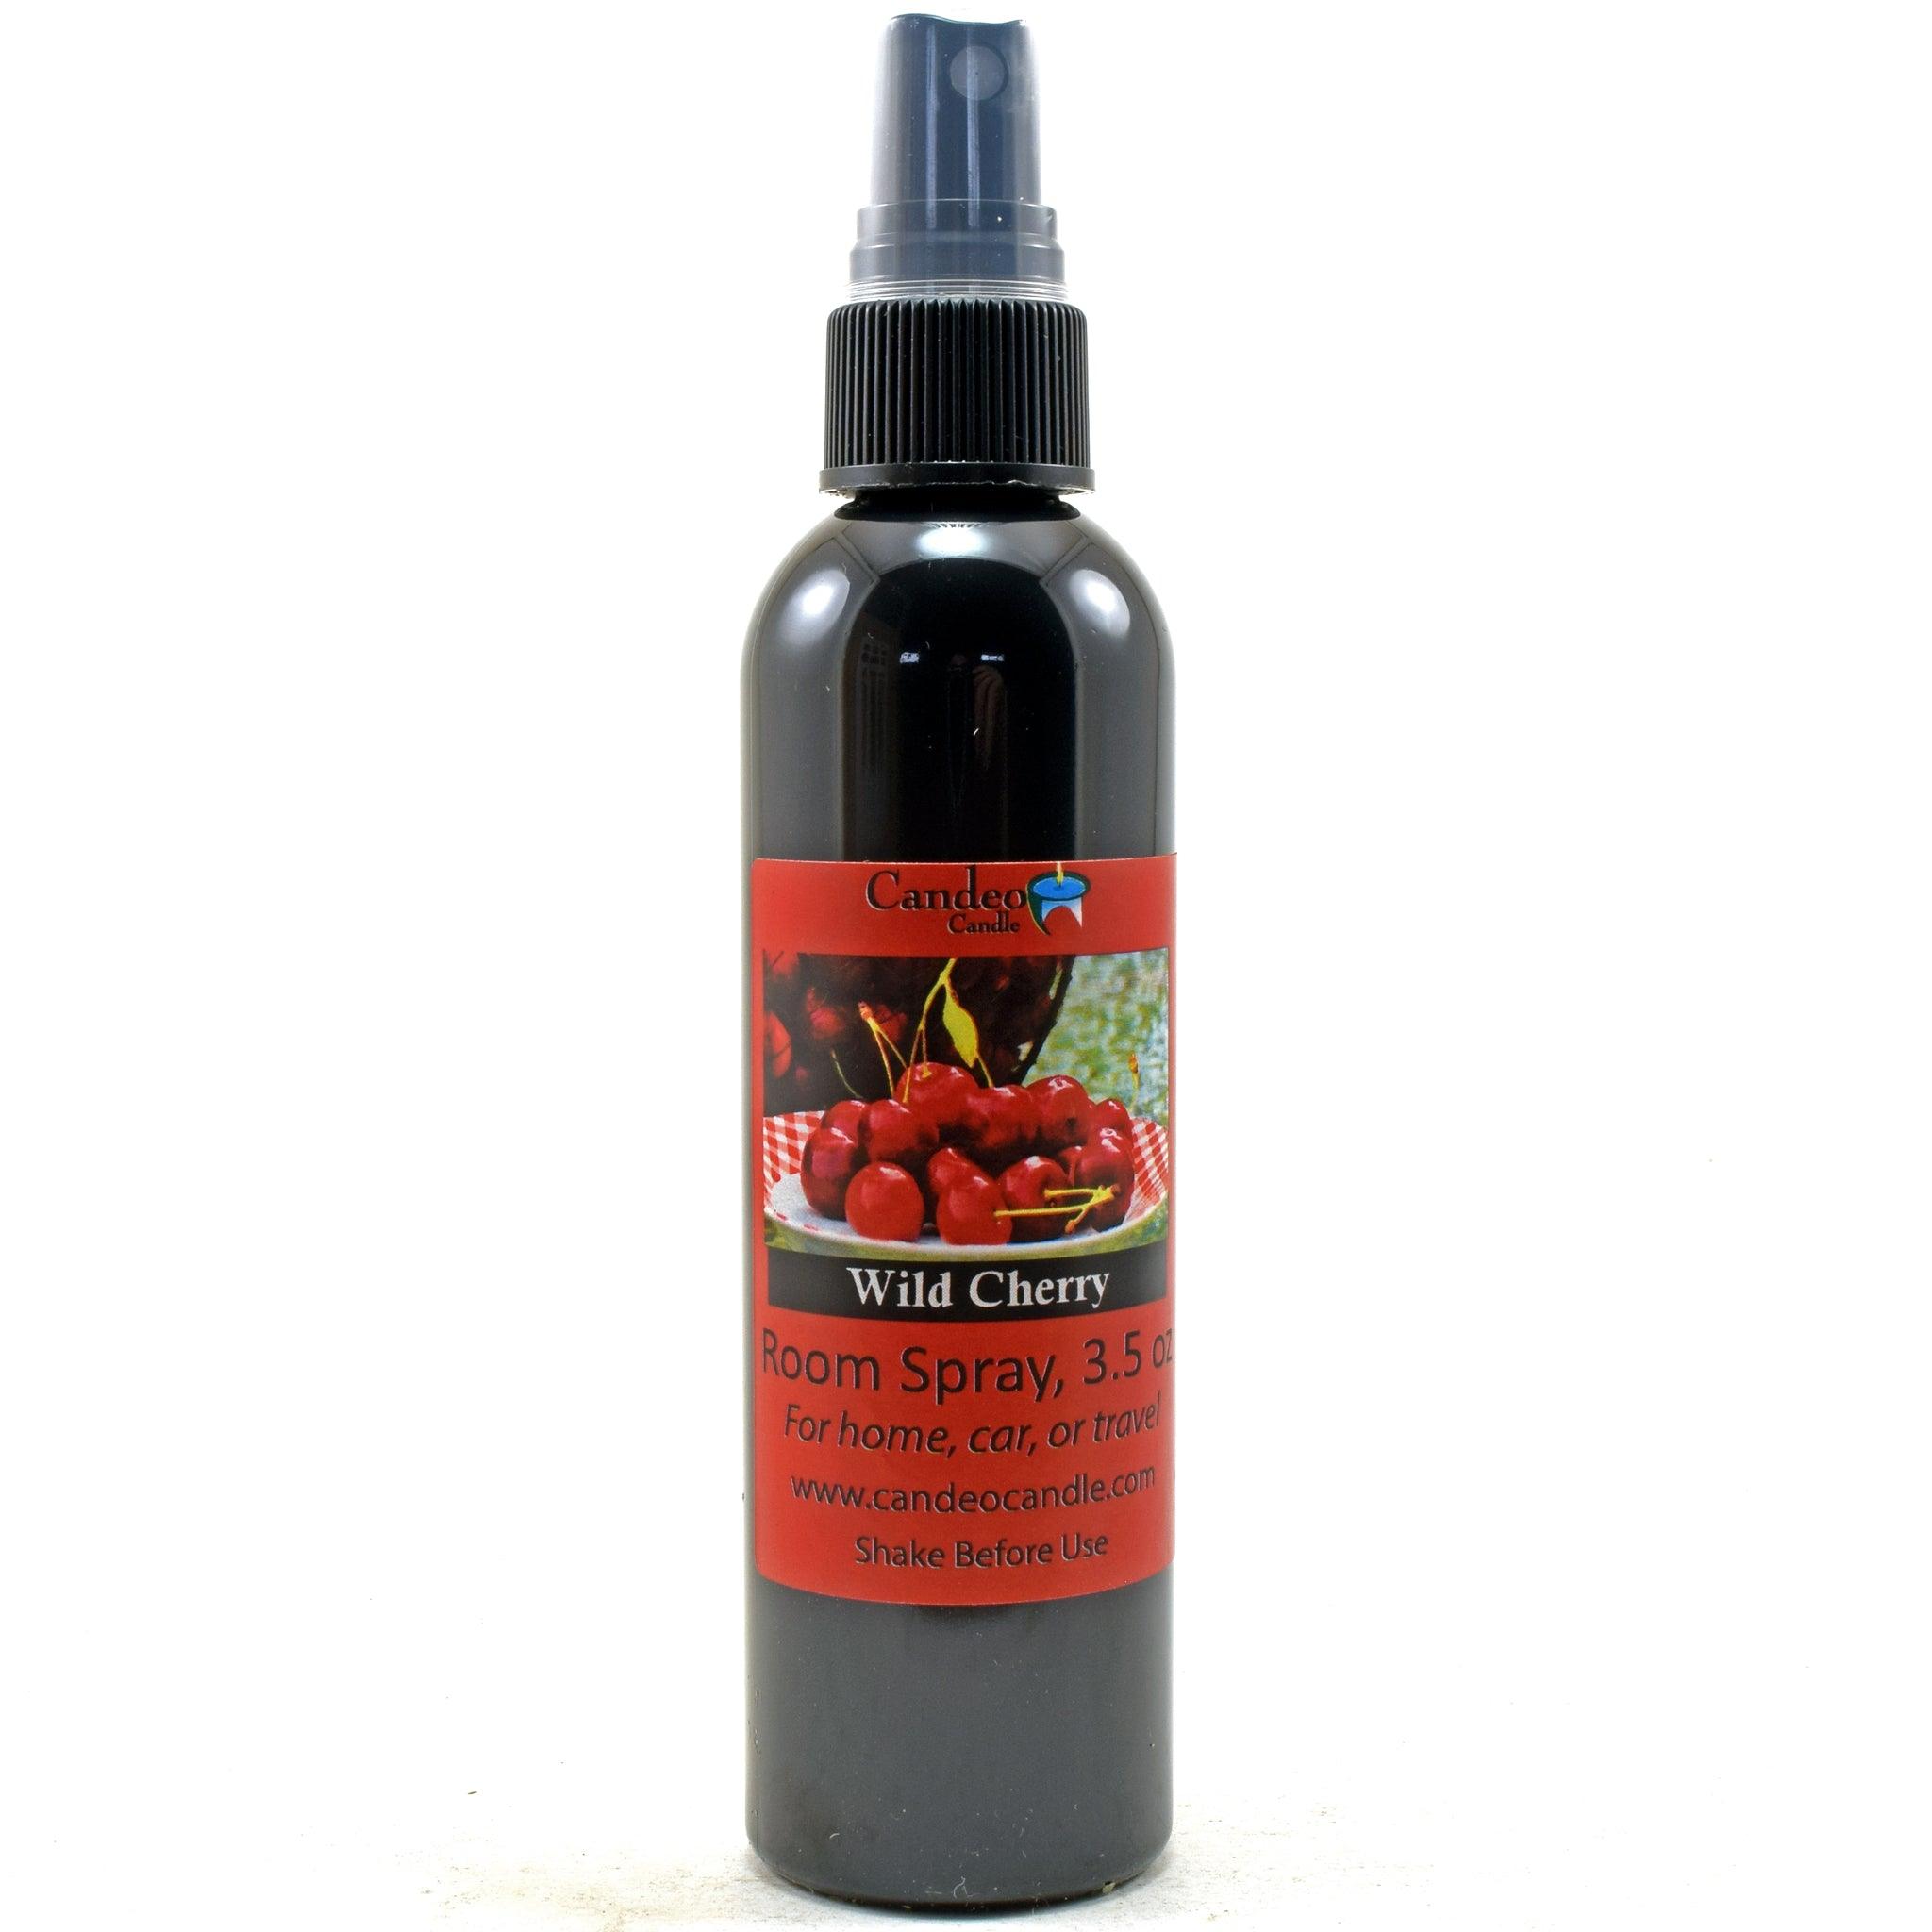 Wild Cherry, 3.5 oz Room Spray - Candeo Candle